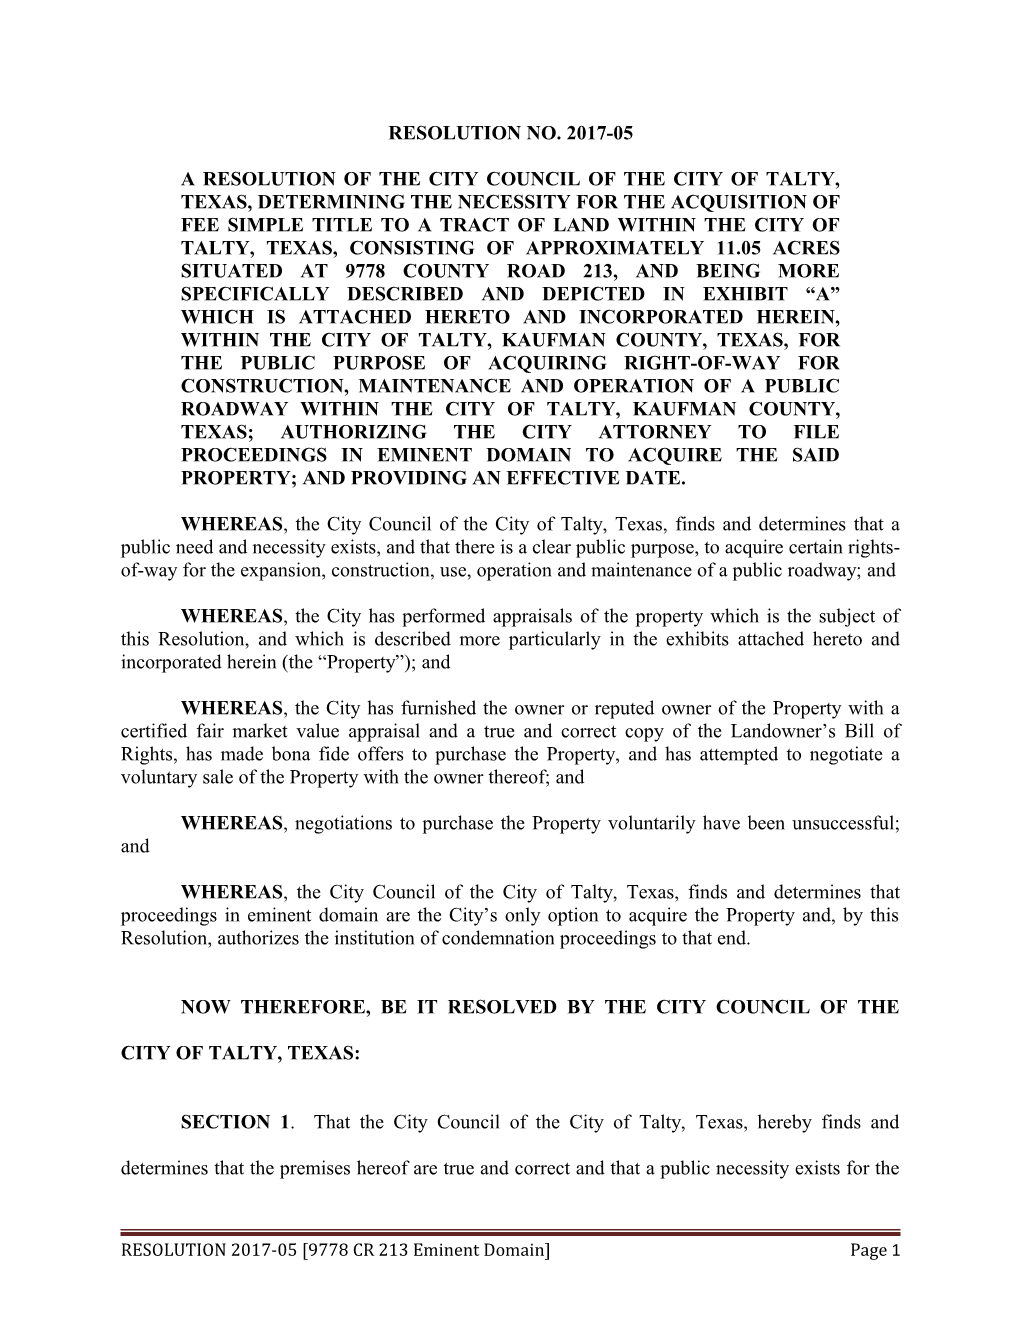 A Resolution of the City Council of the City of Talty, Texas, Determining the Necessity